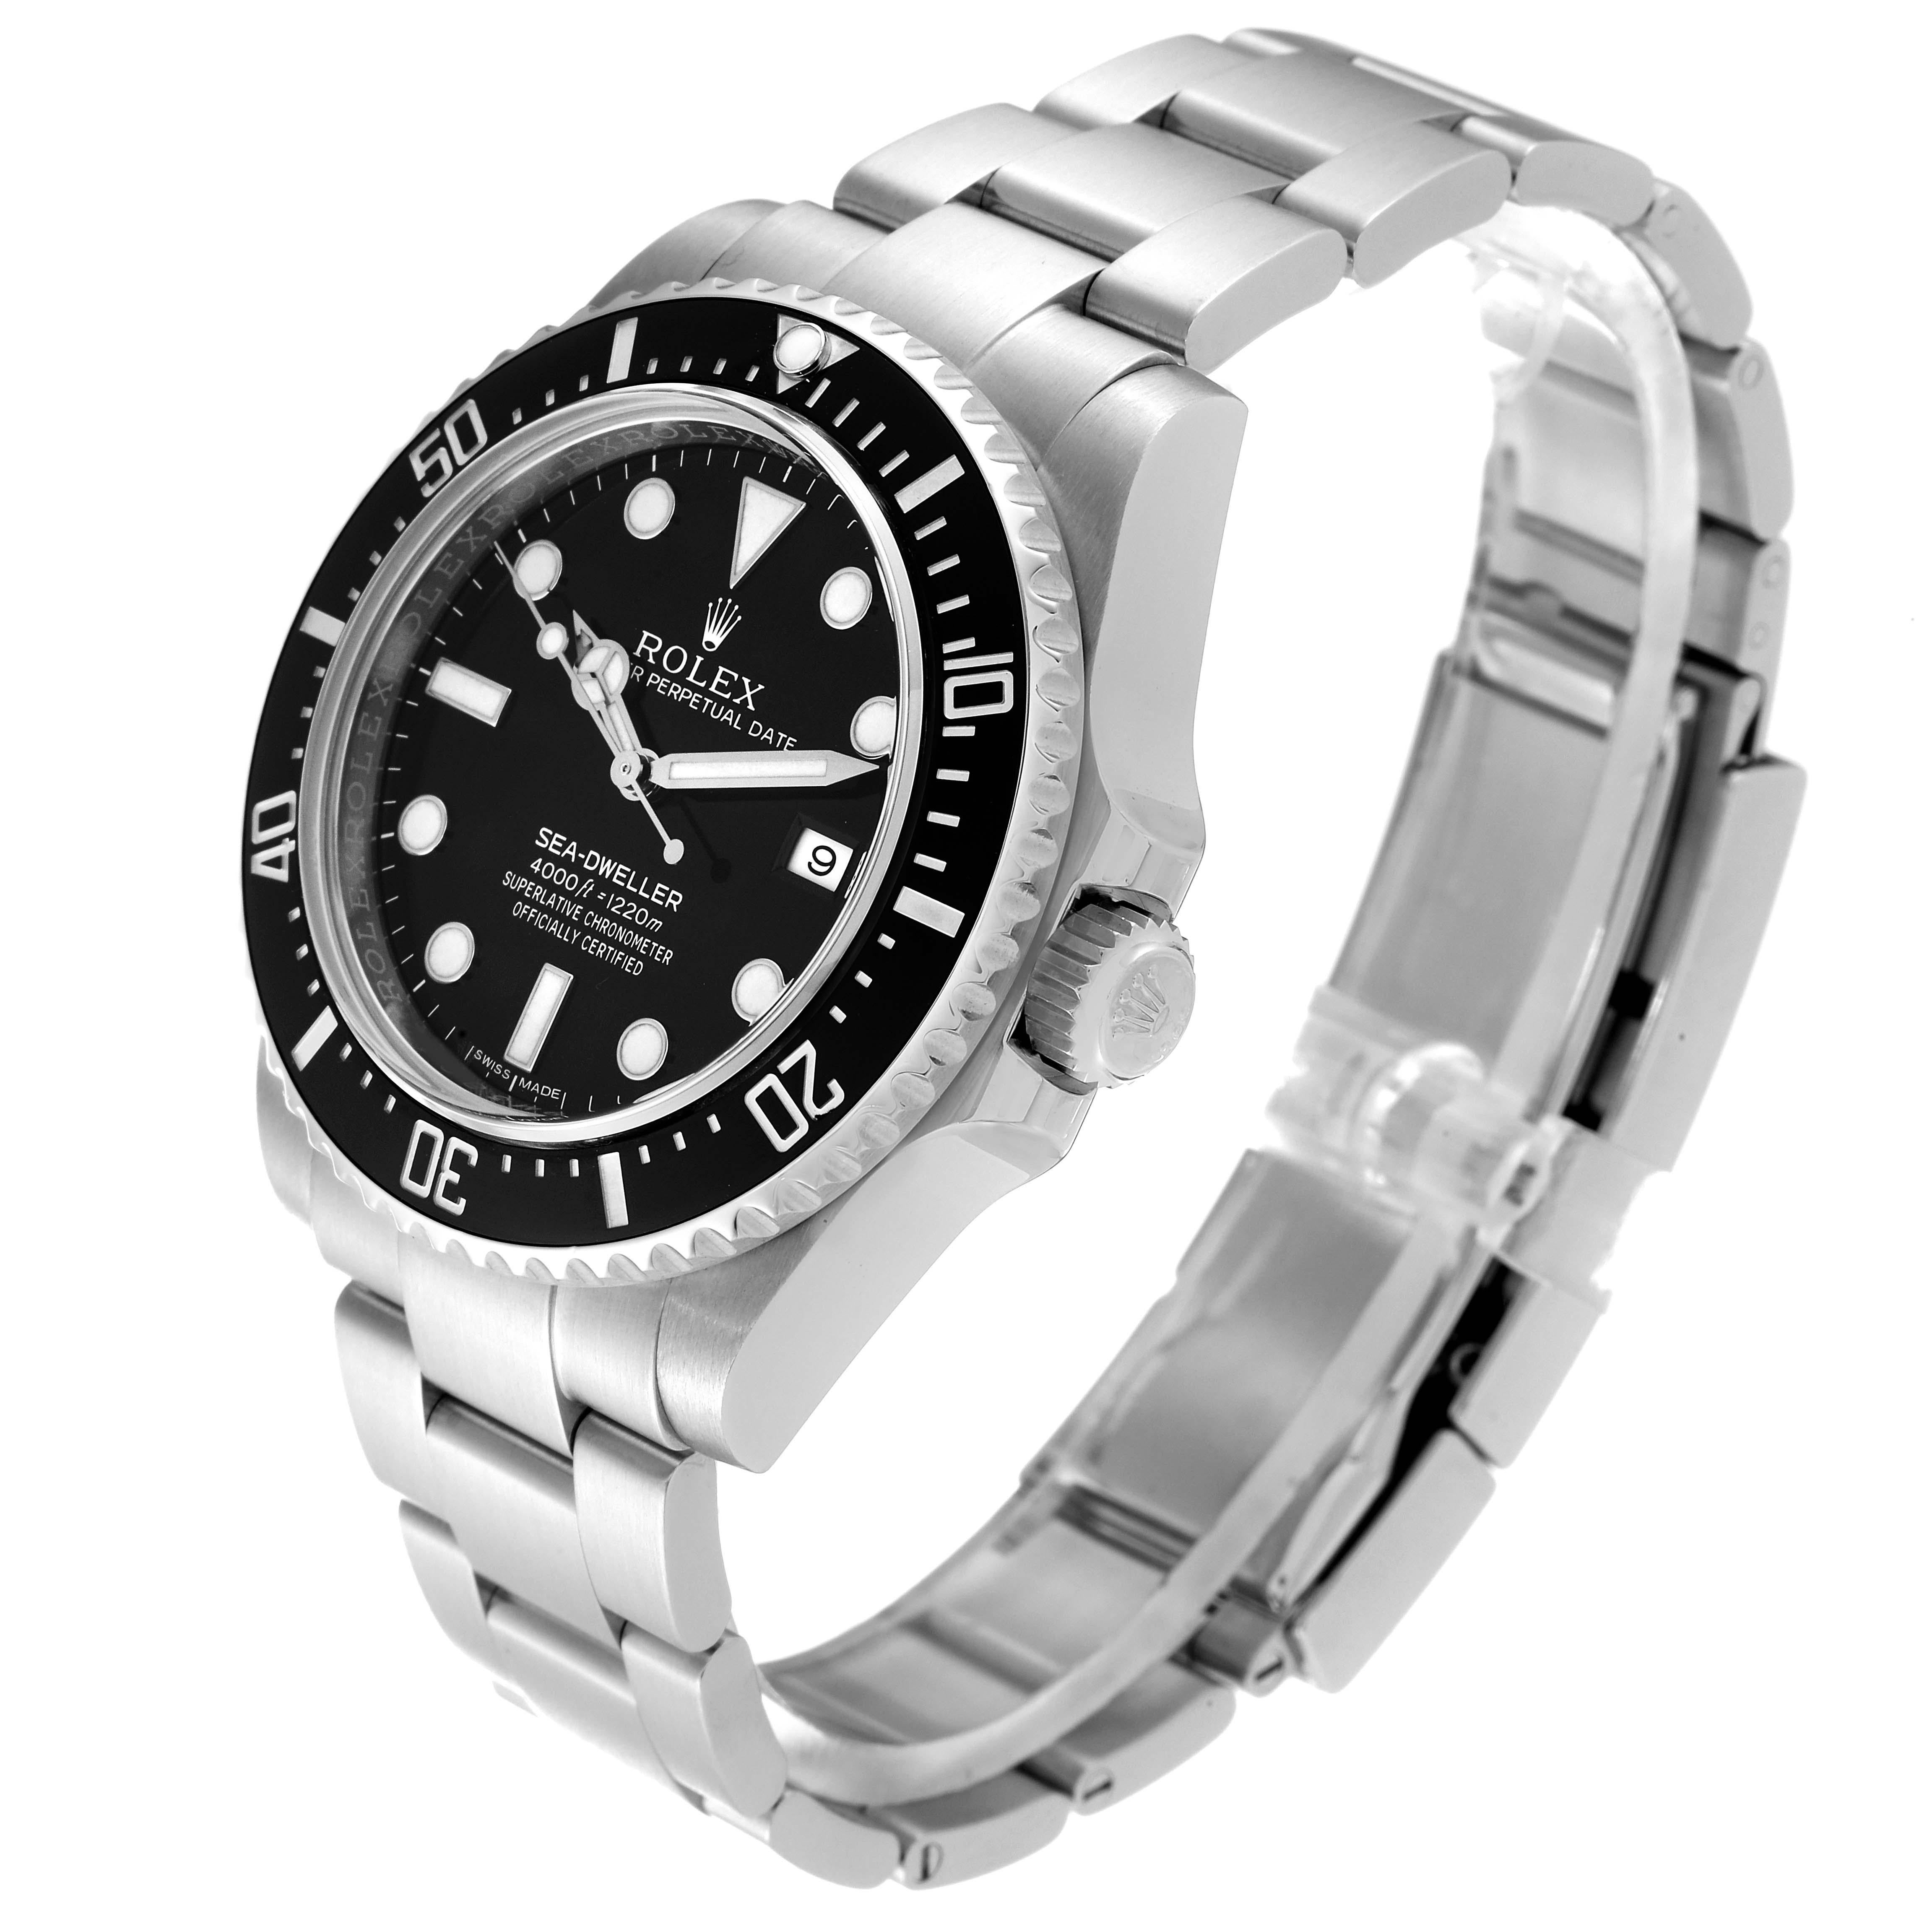 Rolex Seadweller 4000 Black Dial Automatic Steel Mens Watch 116600 For Sale 1